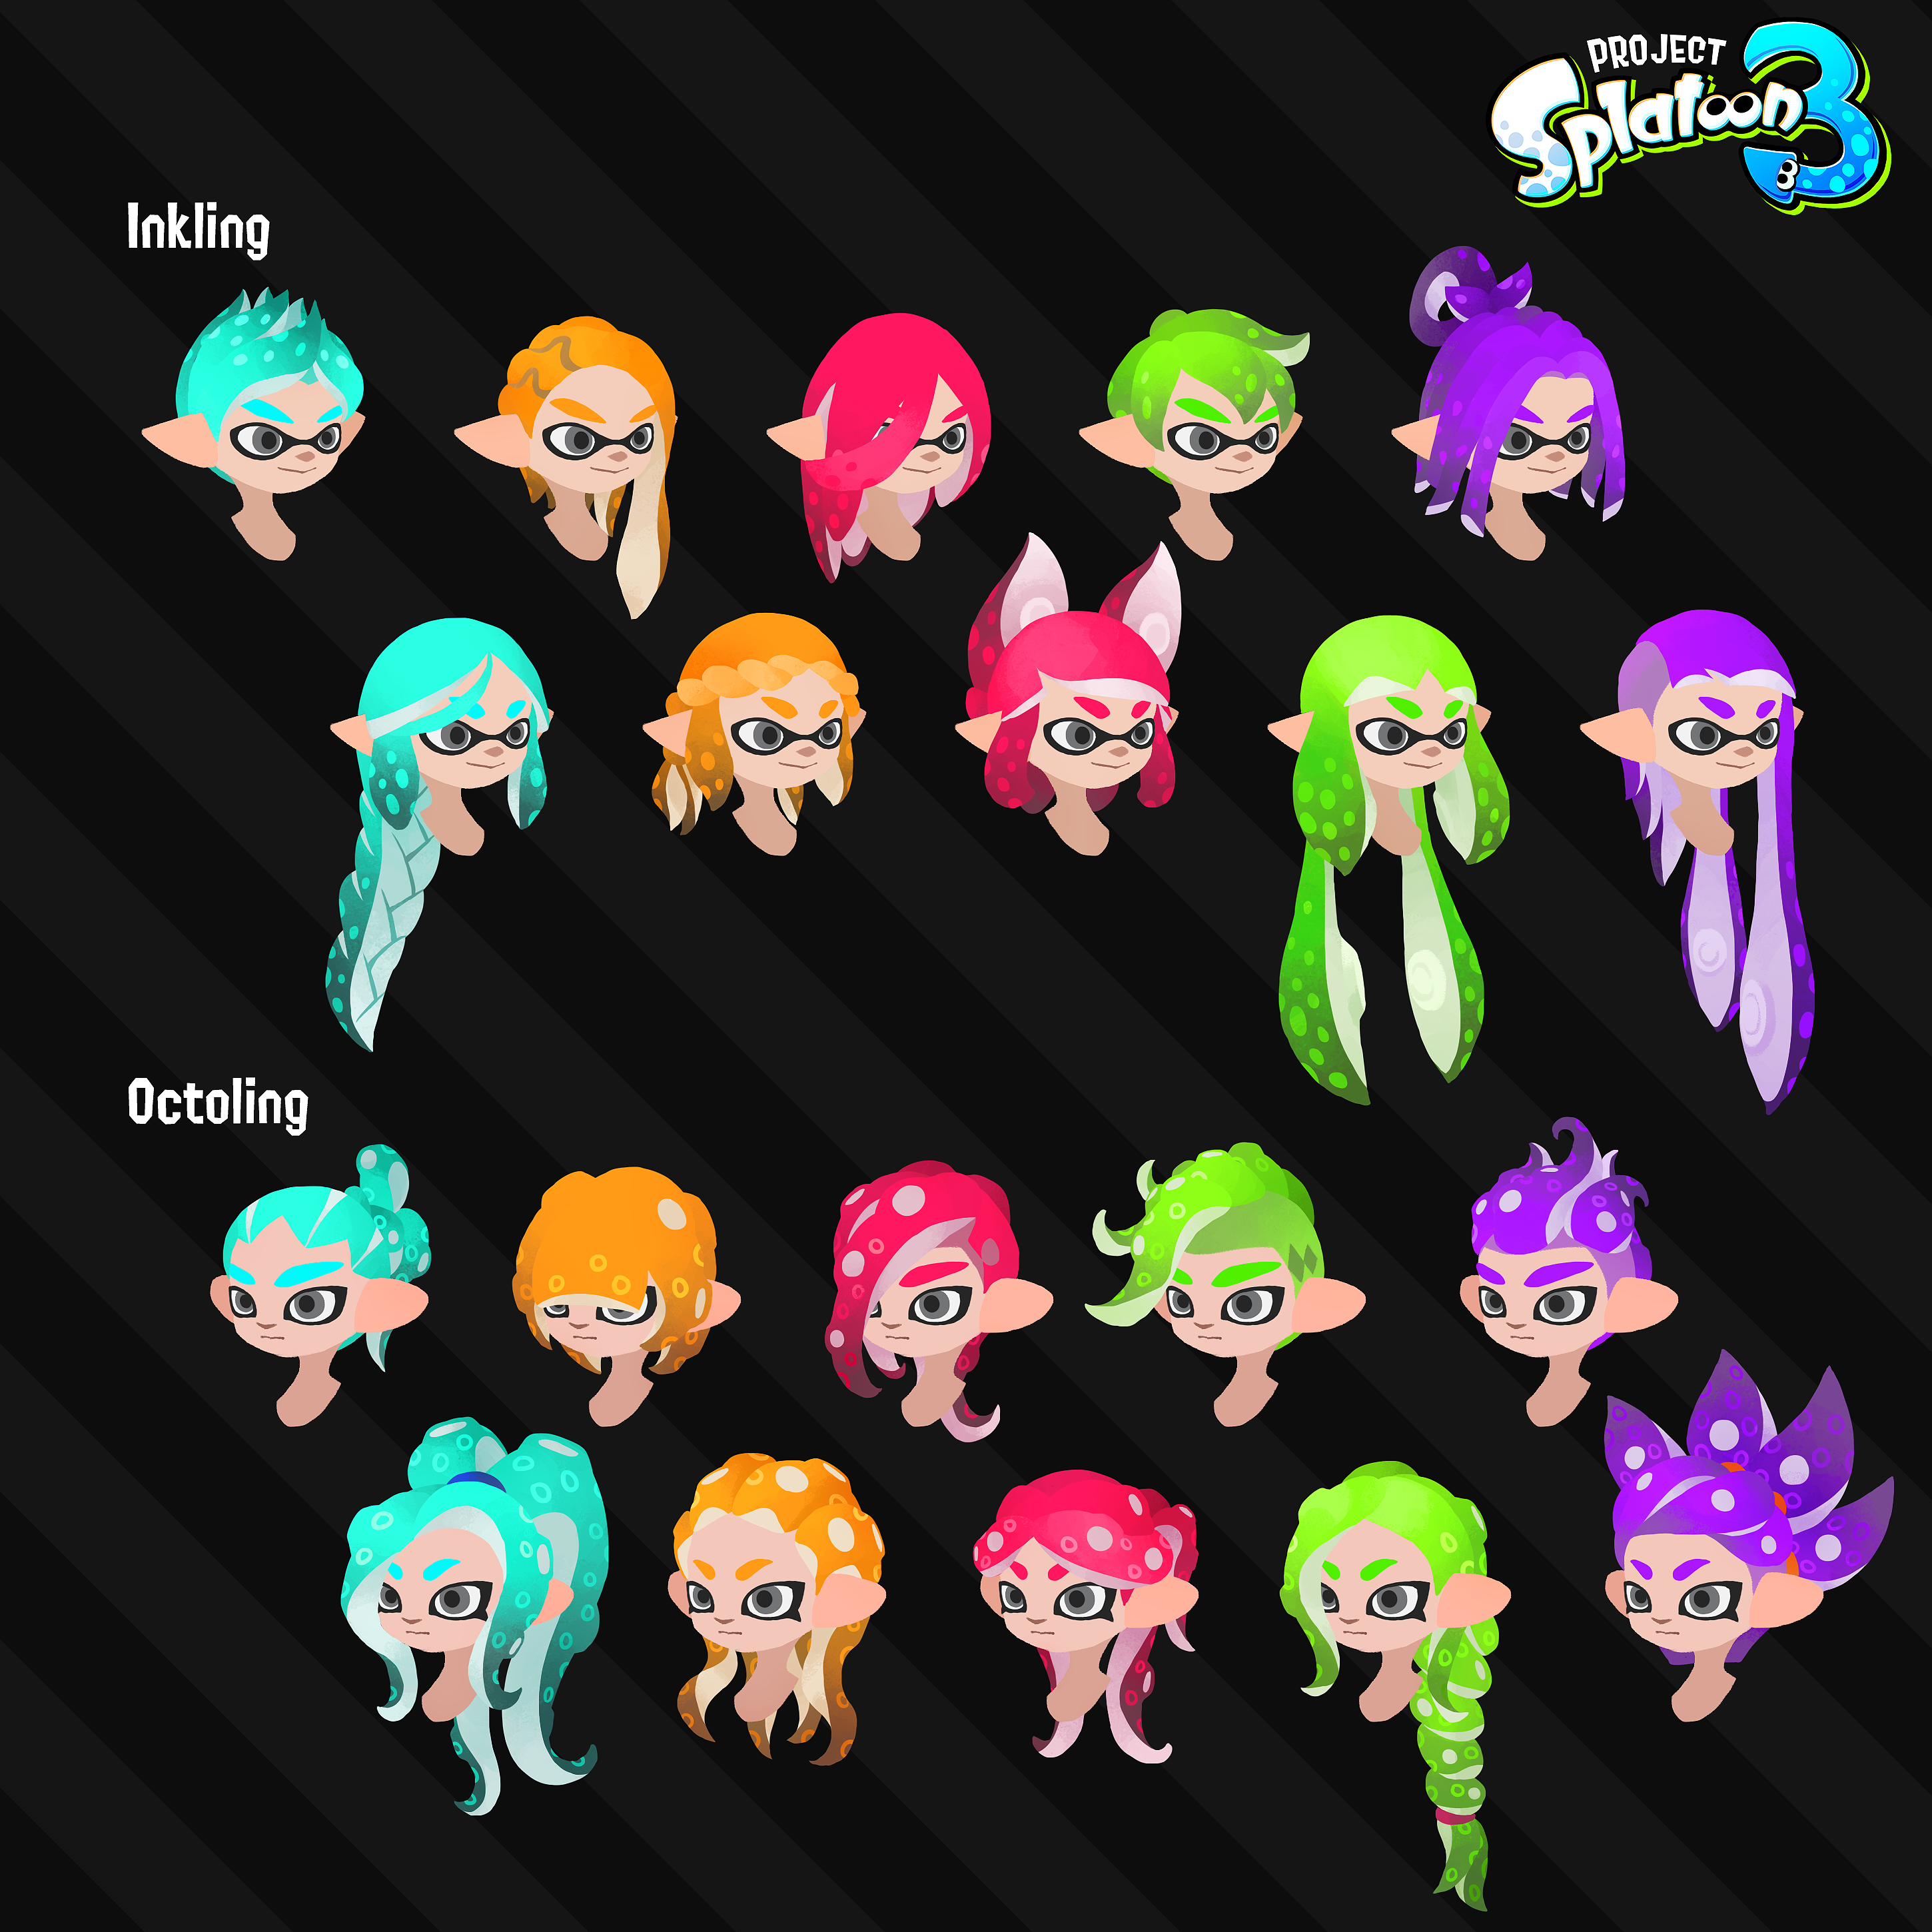 Project Splatoon 3 new hairstyle .com